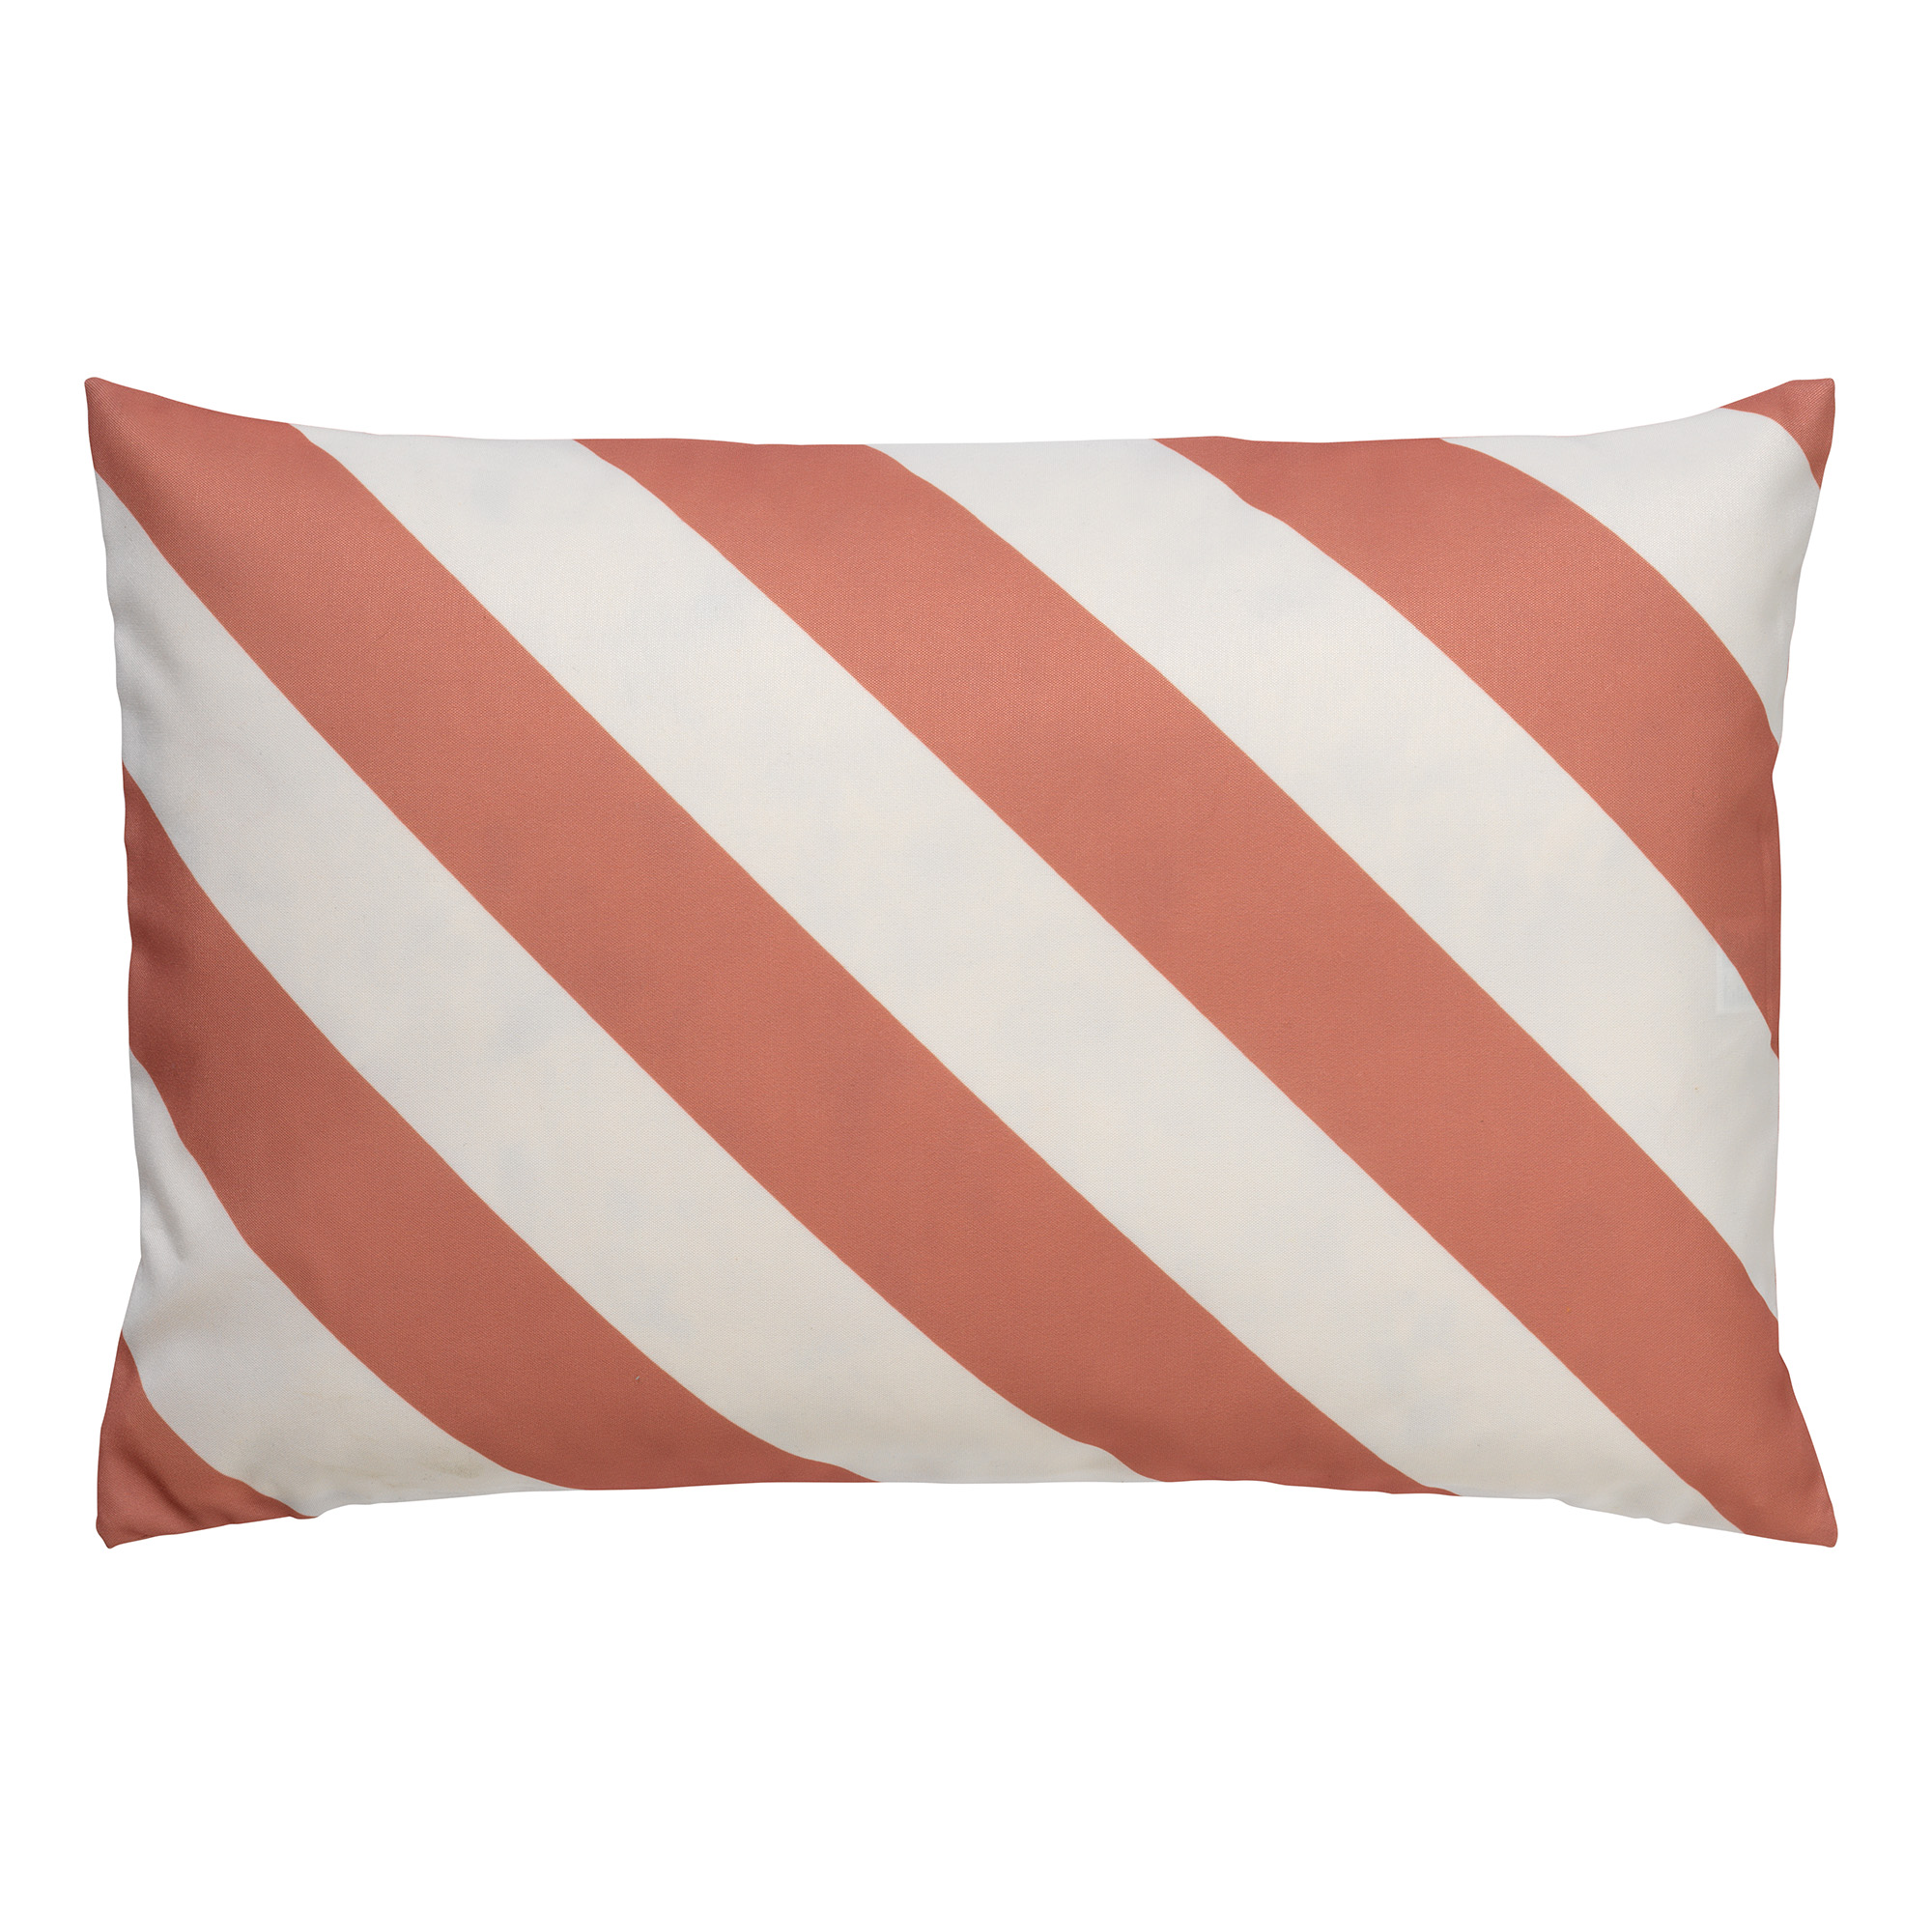 SANZENO - Cushion cover 40x60 cm Muted Clay - pink